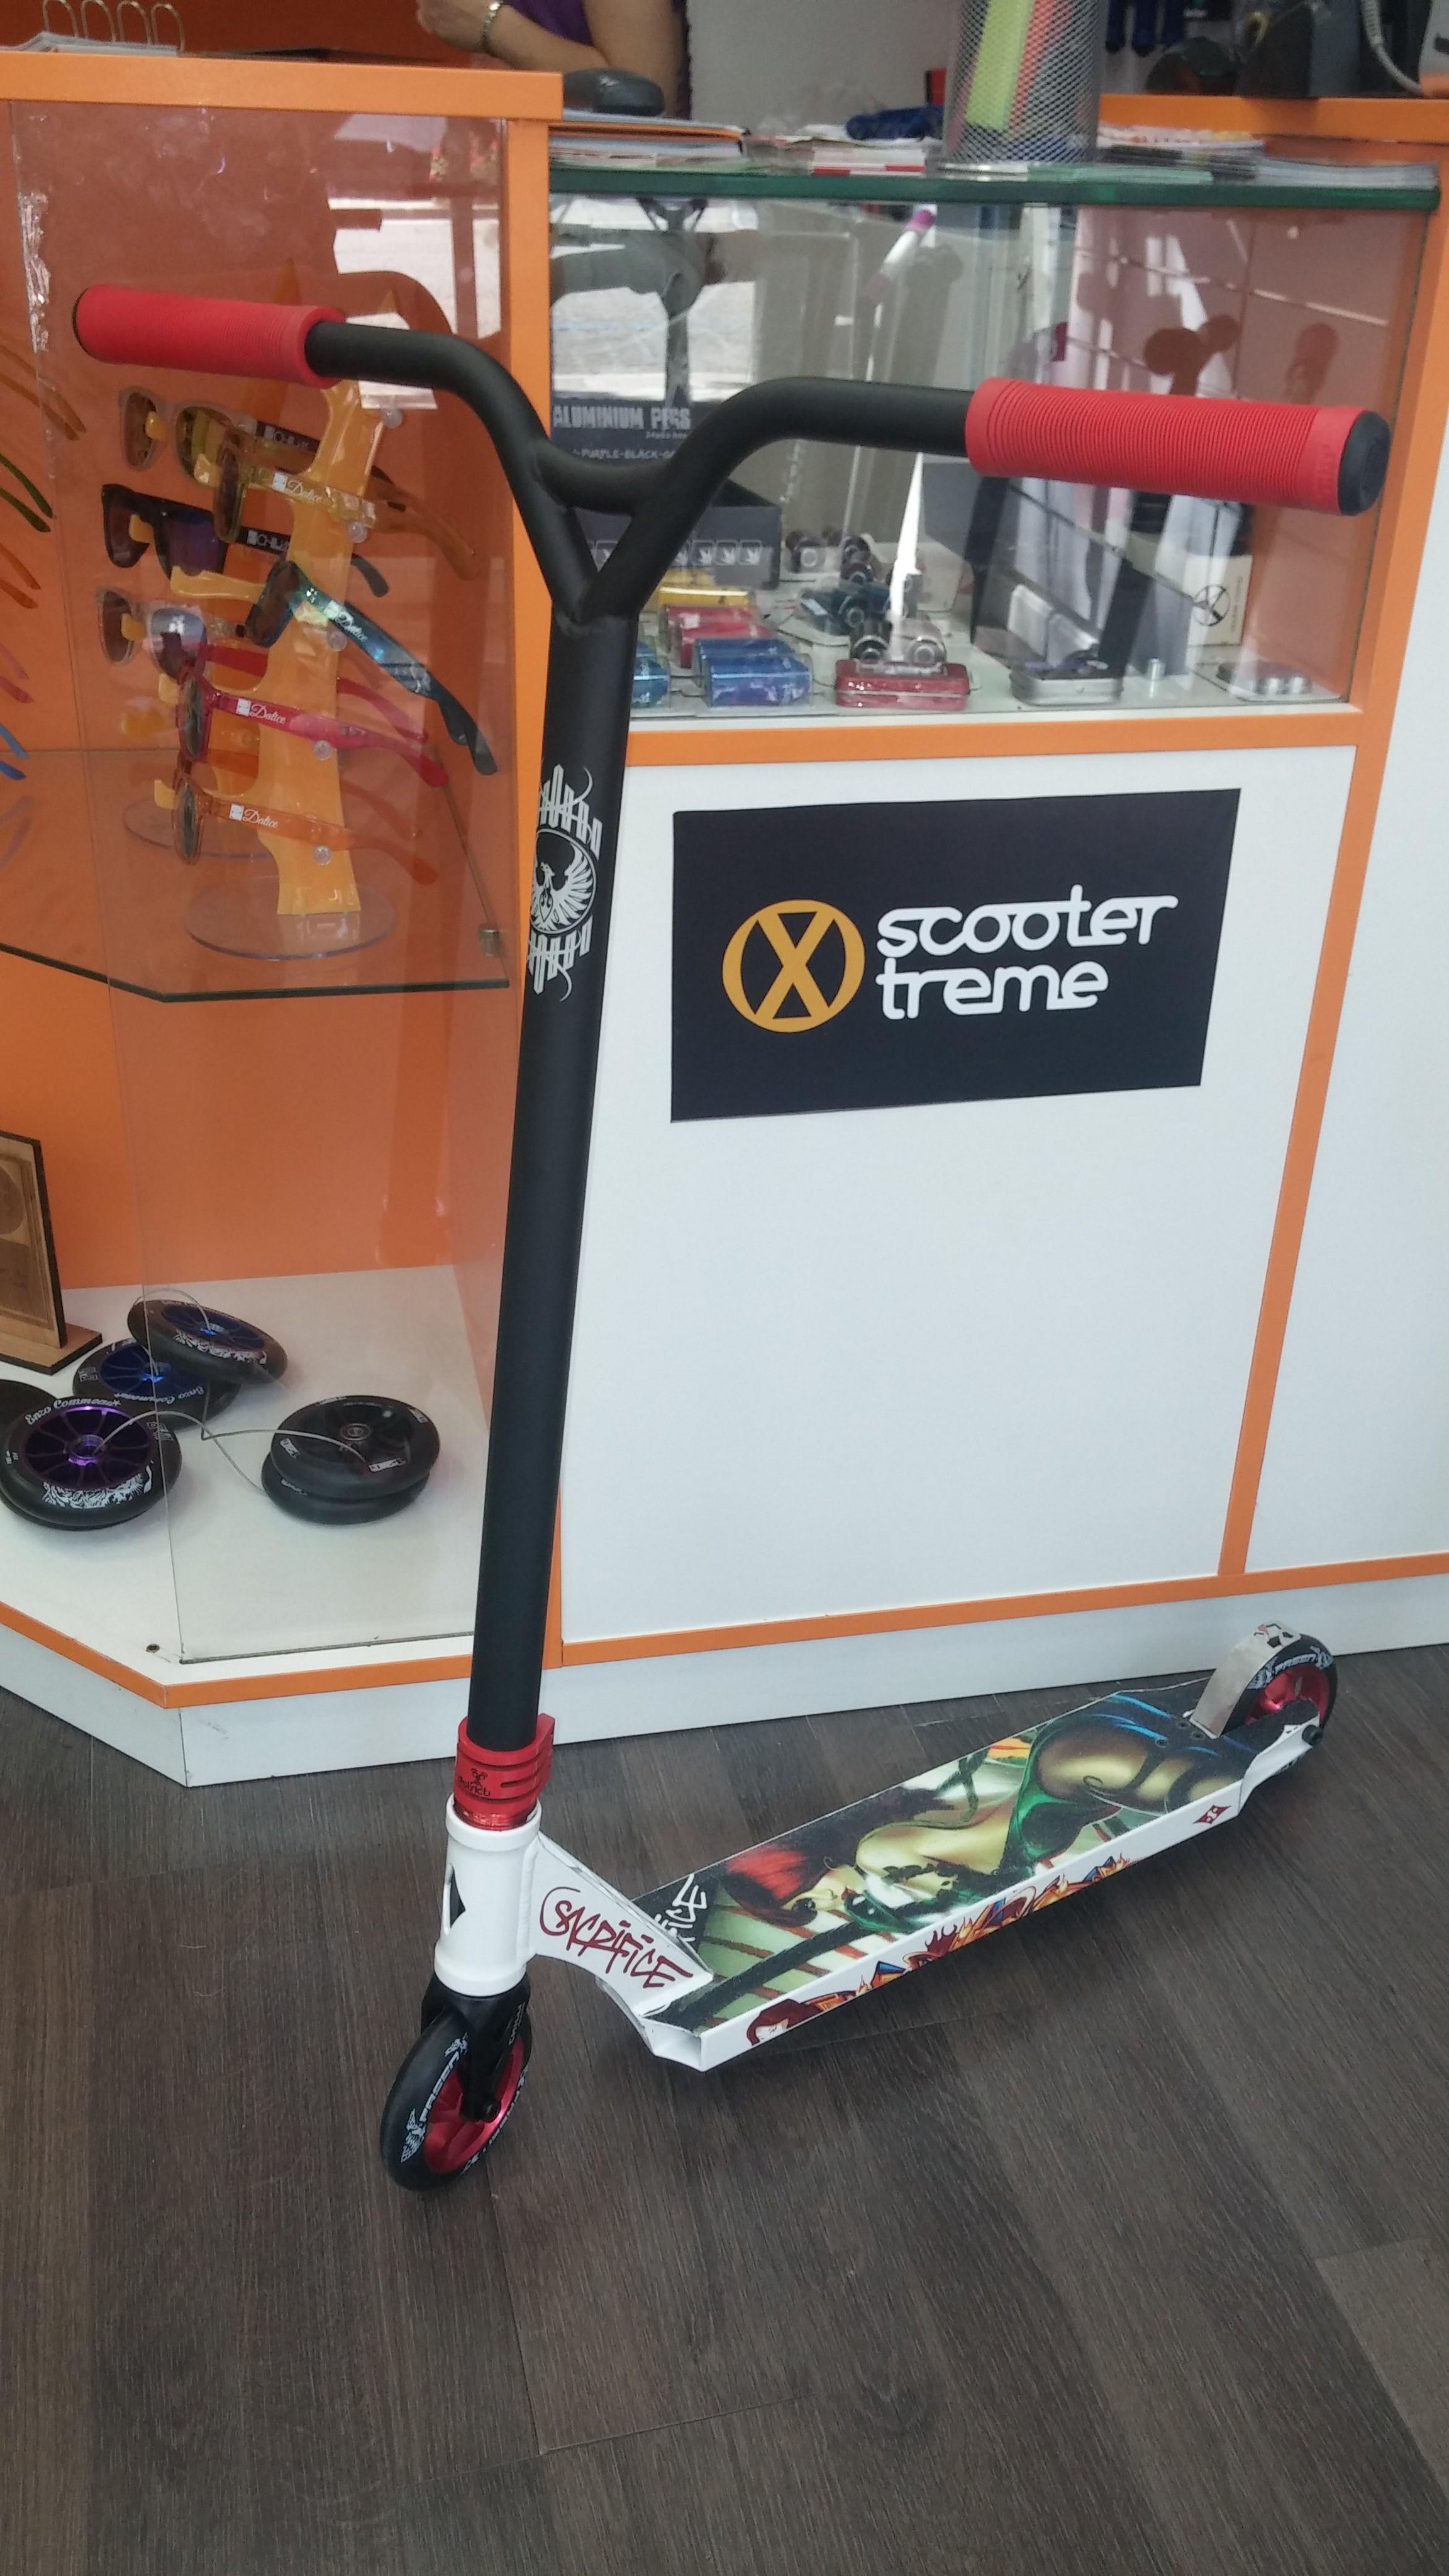 ScooterXtreme (@Scooter_Xtreme) / Twitter